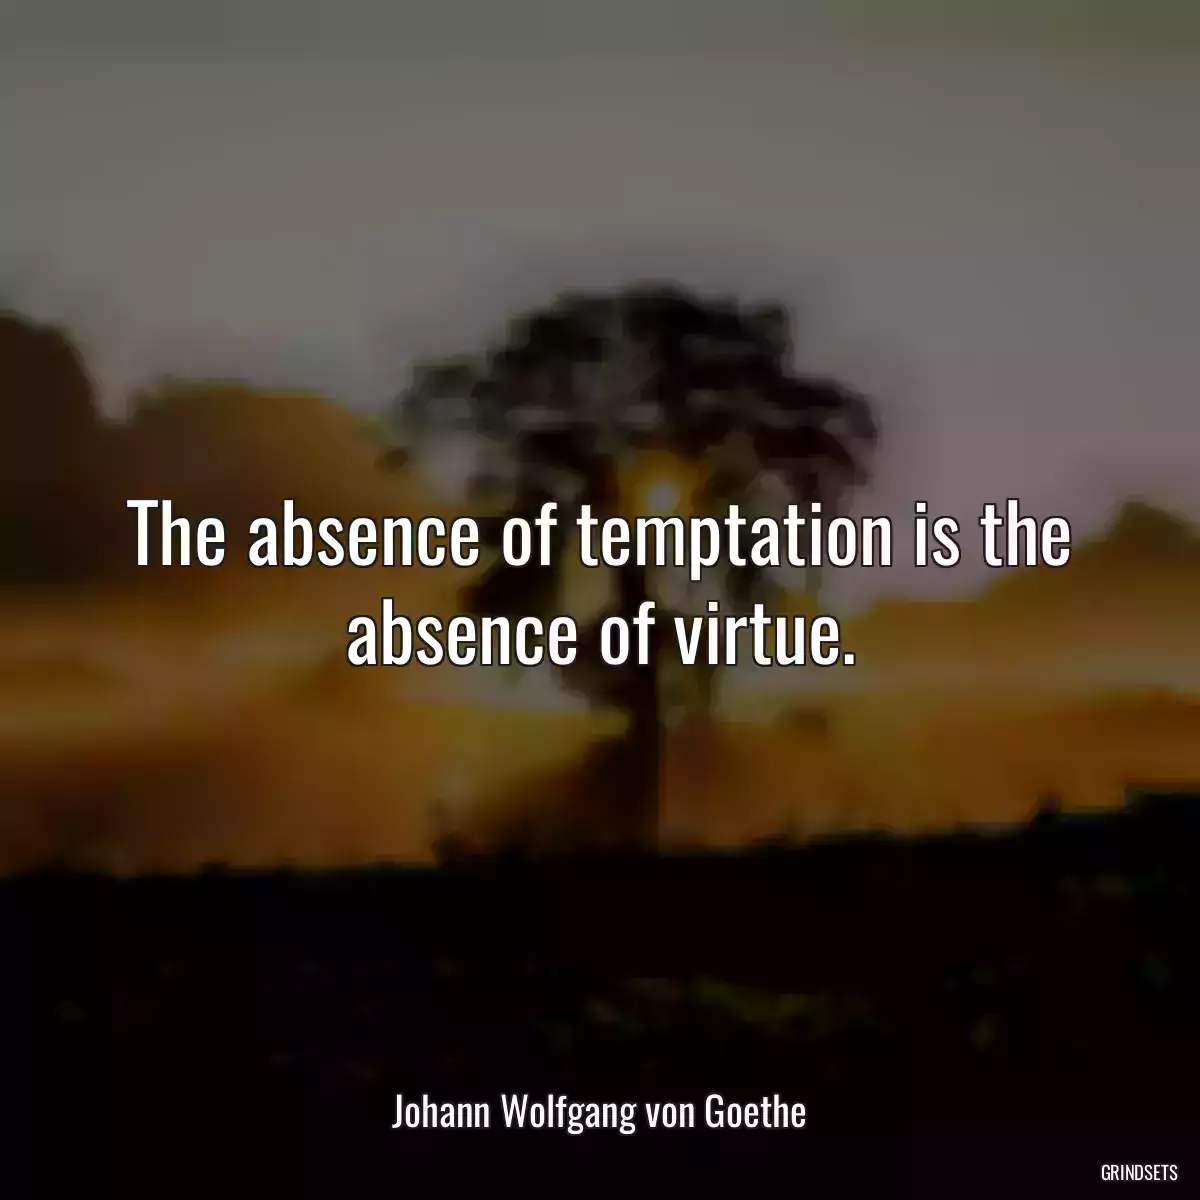 The absence of temptation is the absence of virtue.